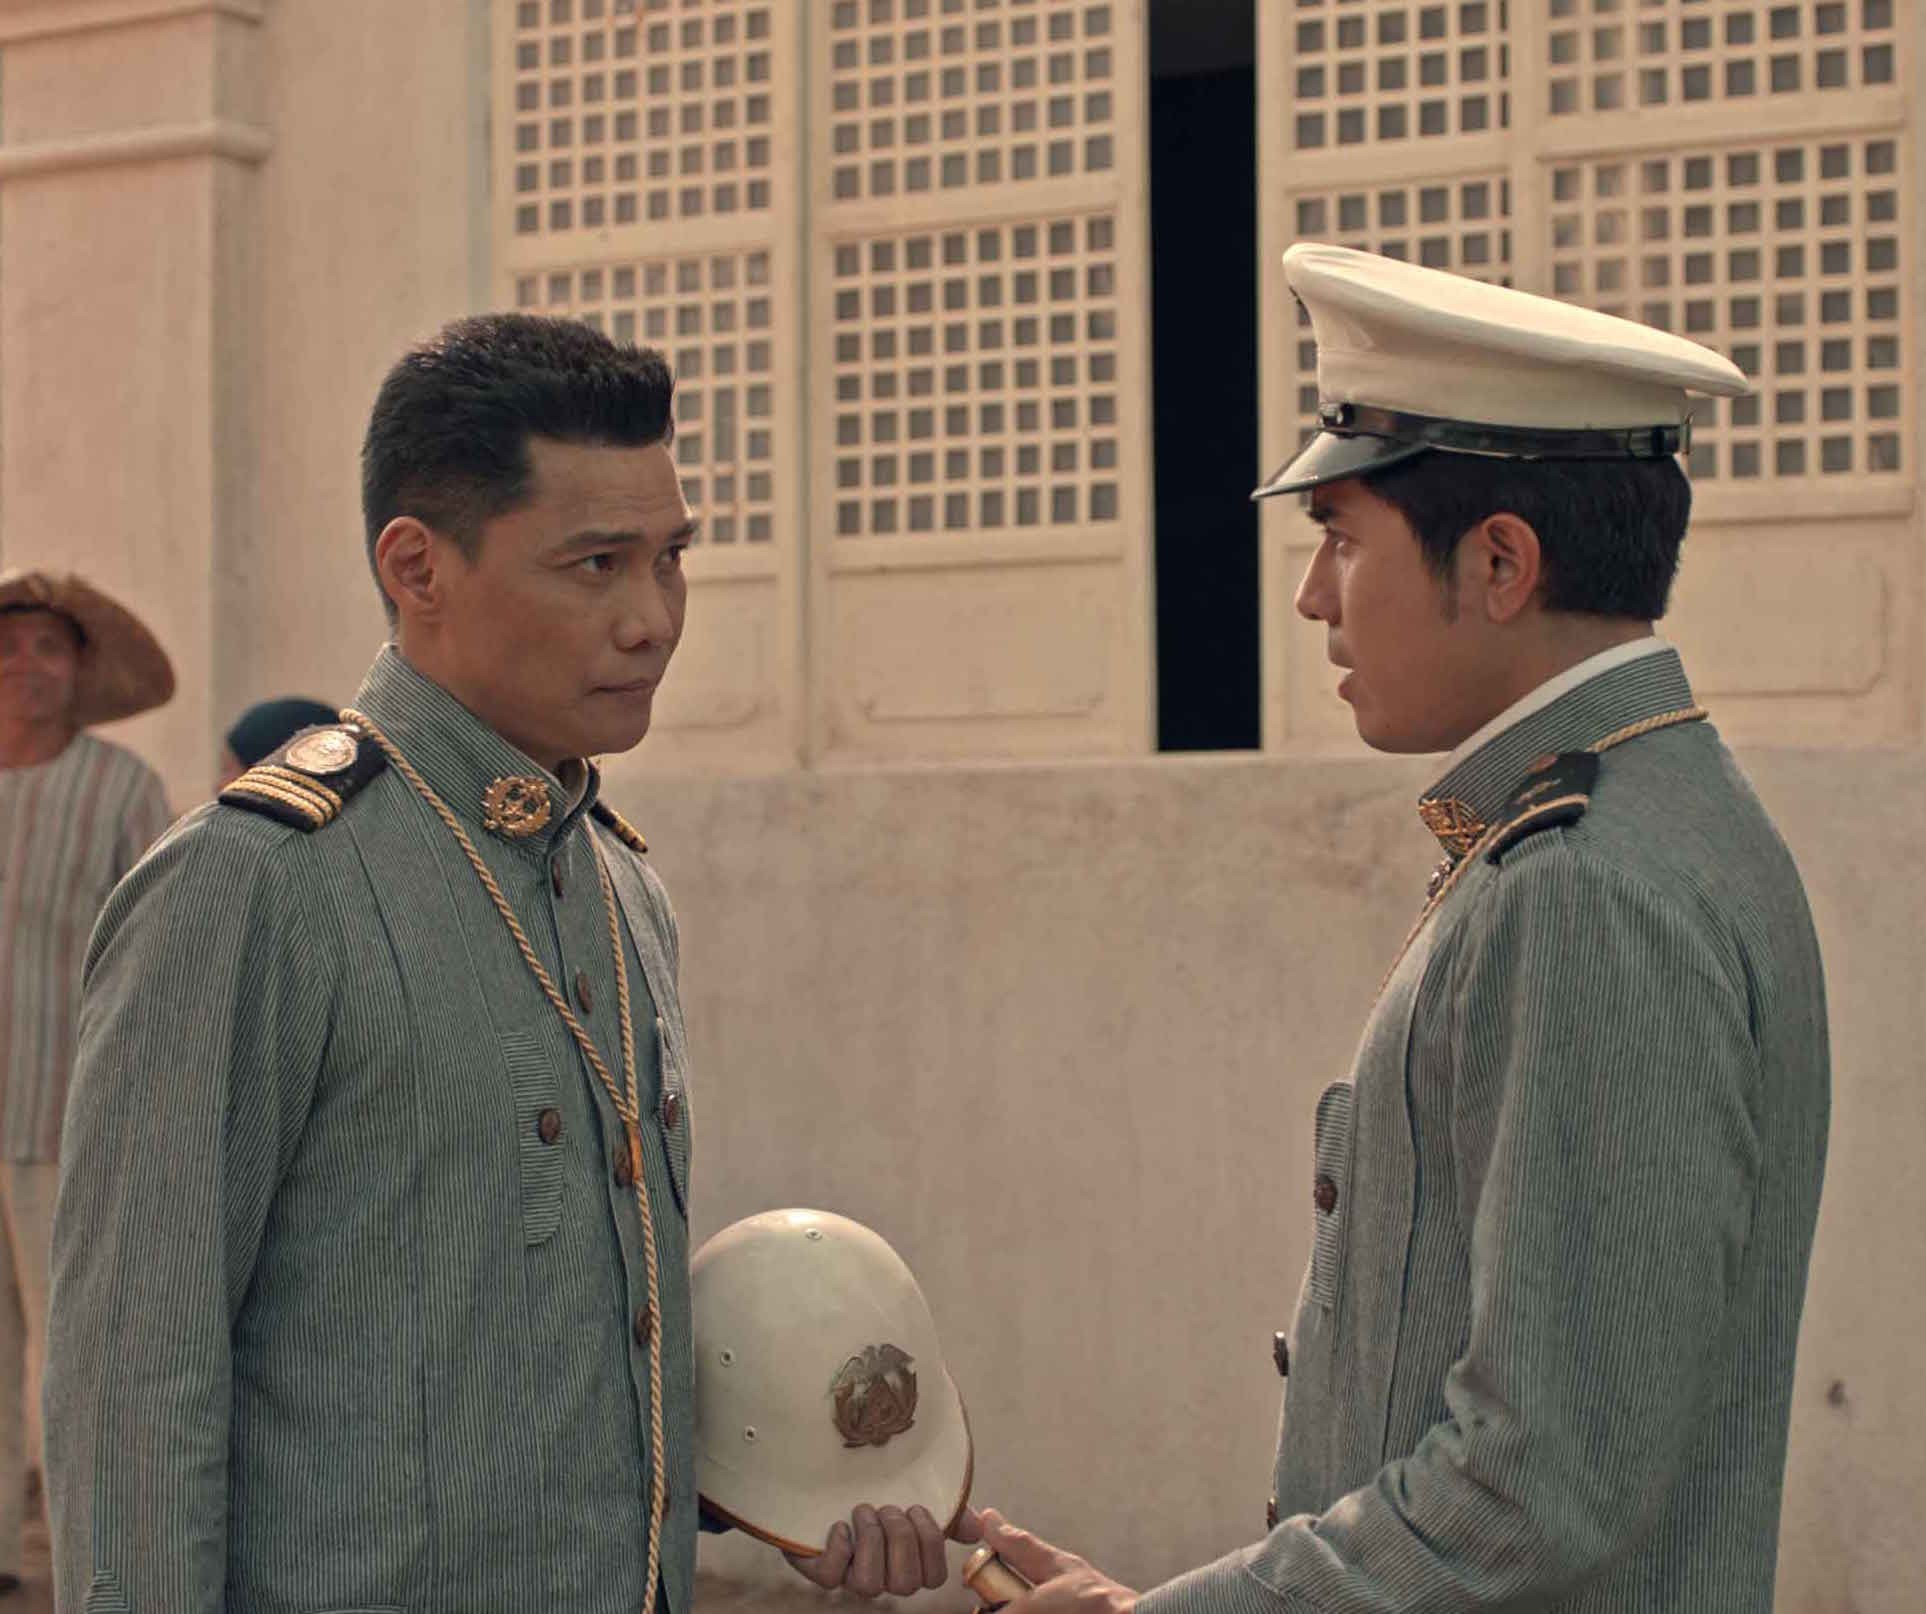 Goyo The Boy General Trailer 1 Trailers And Videos Rotten Tomatoes